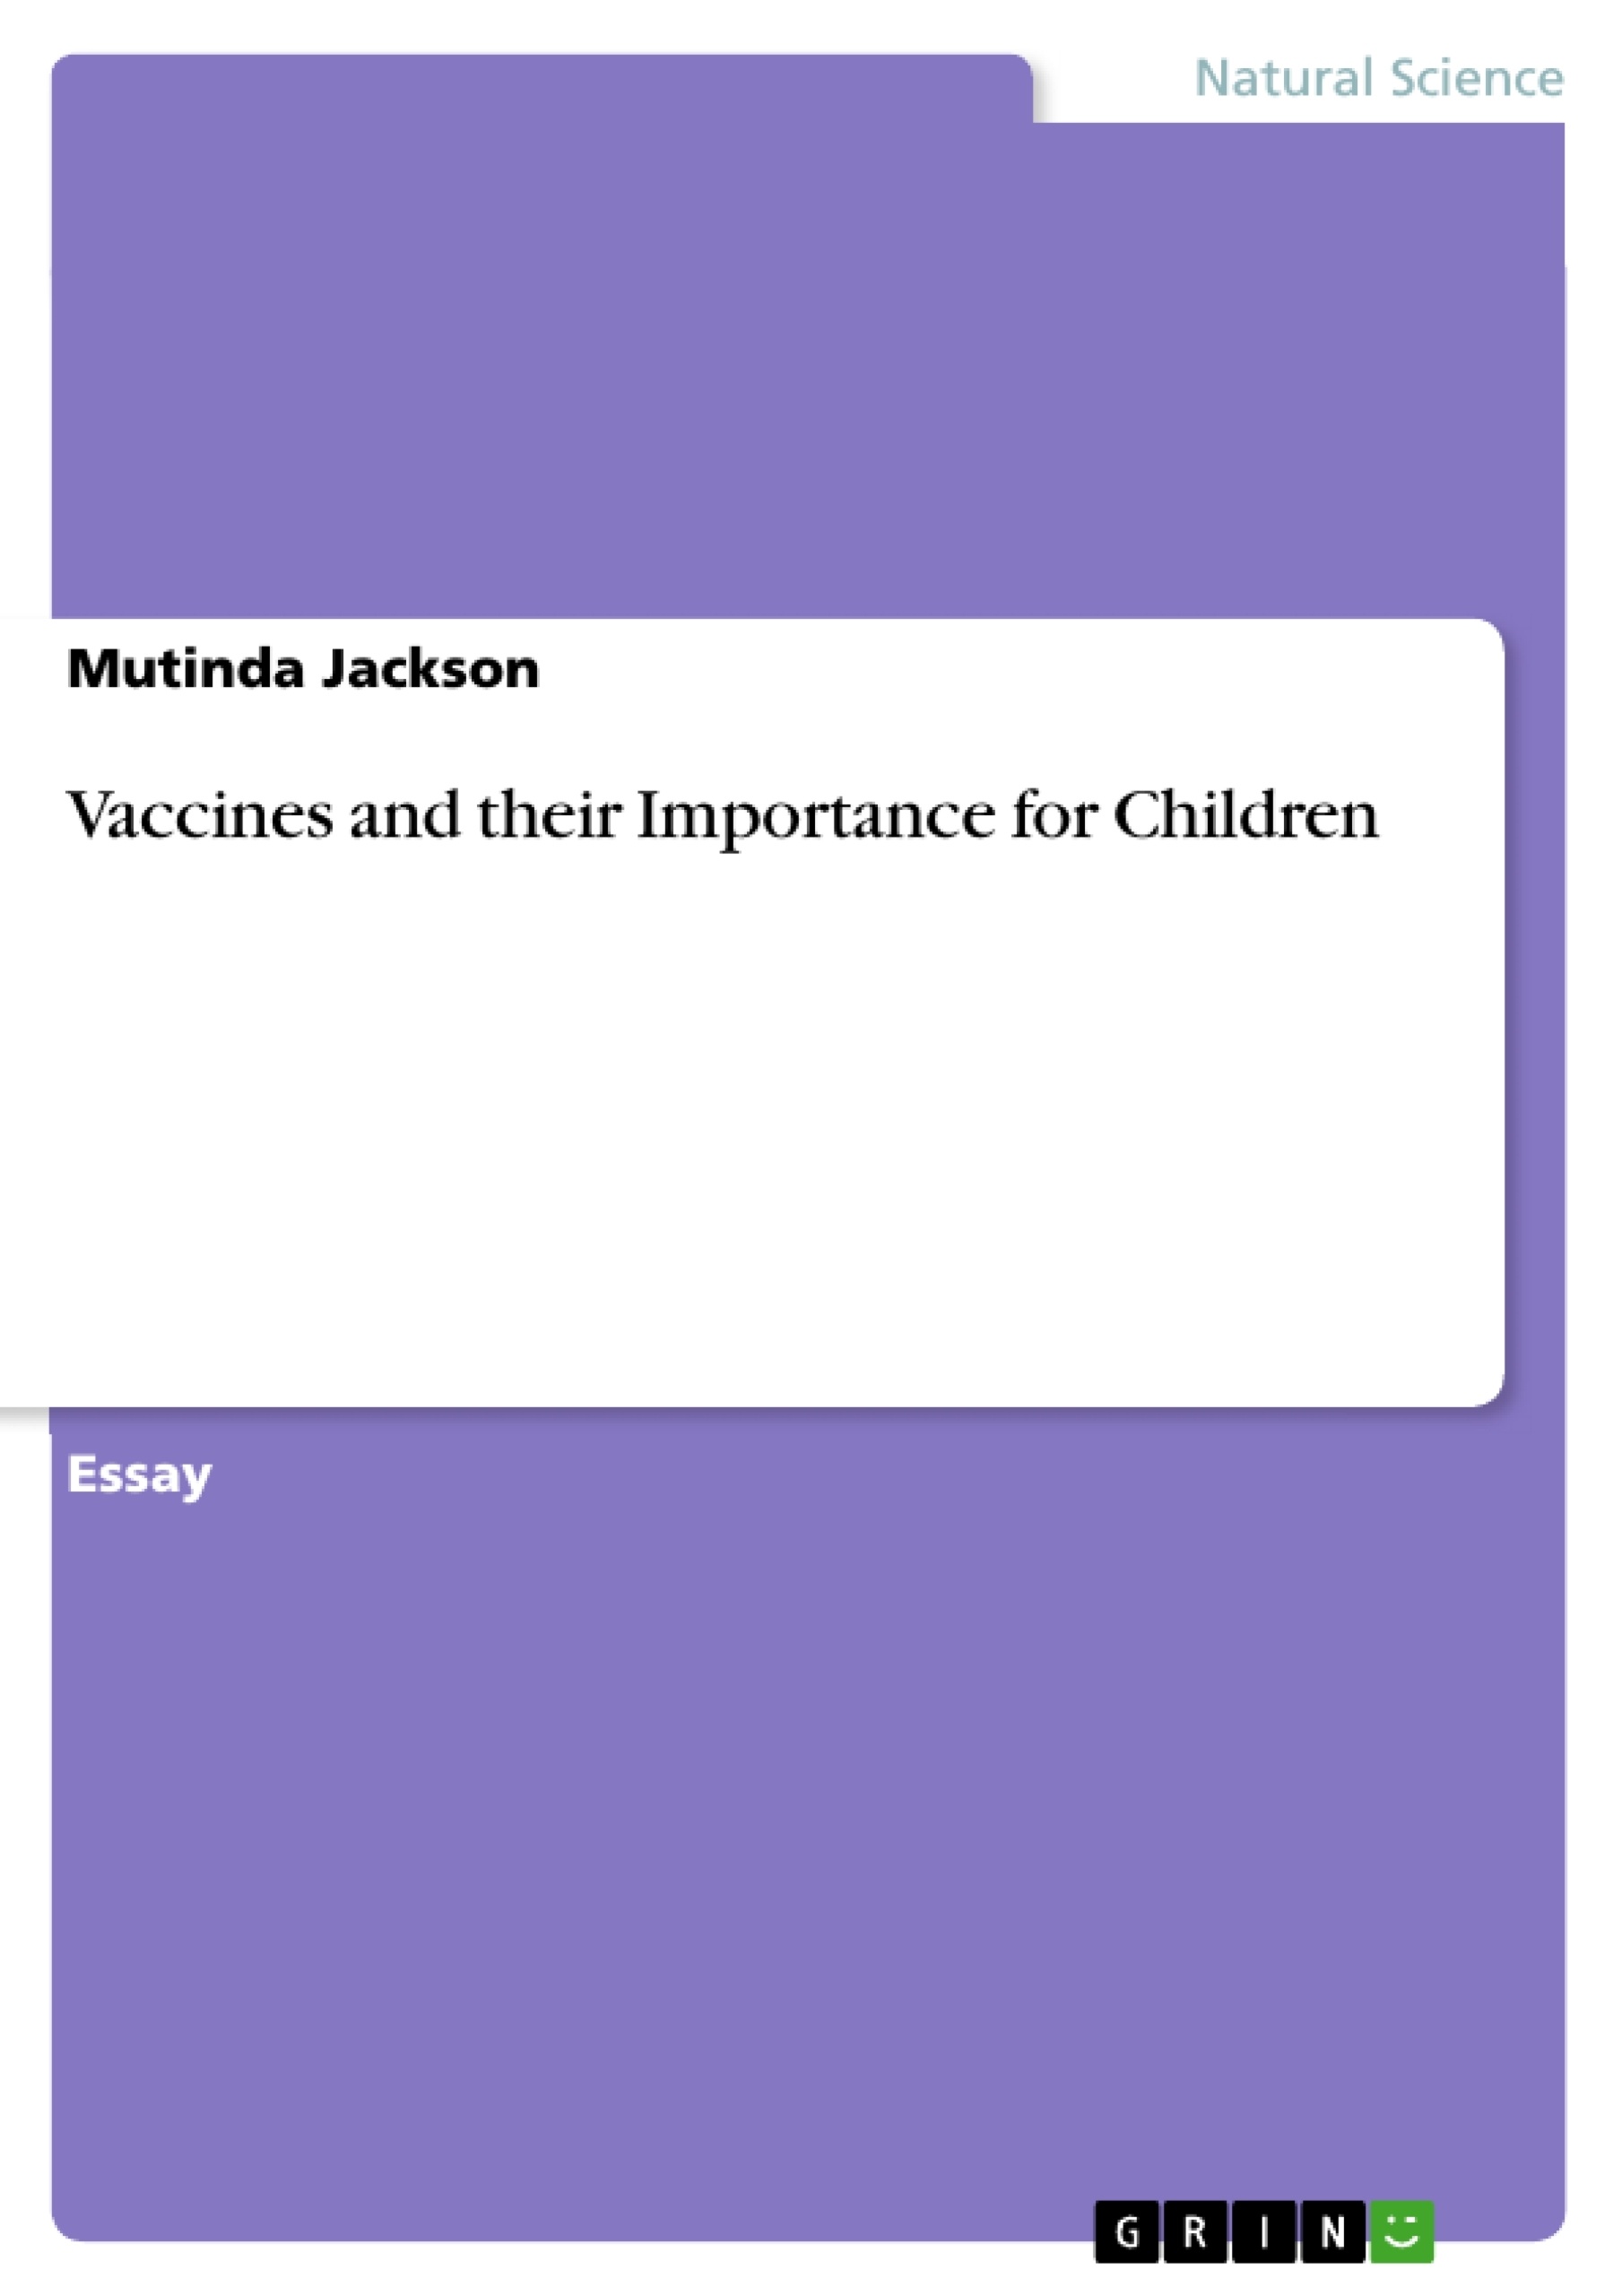 Título: Vaccines and their Importance for Children